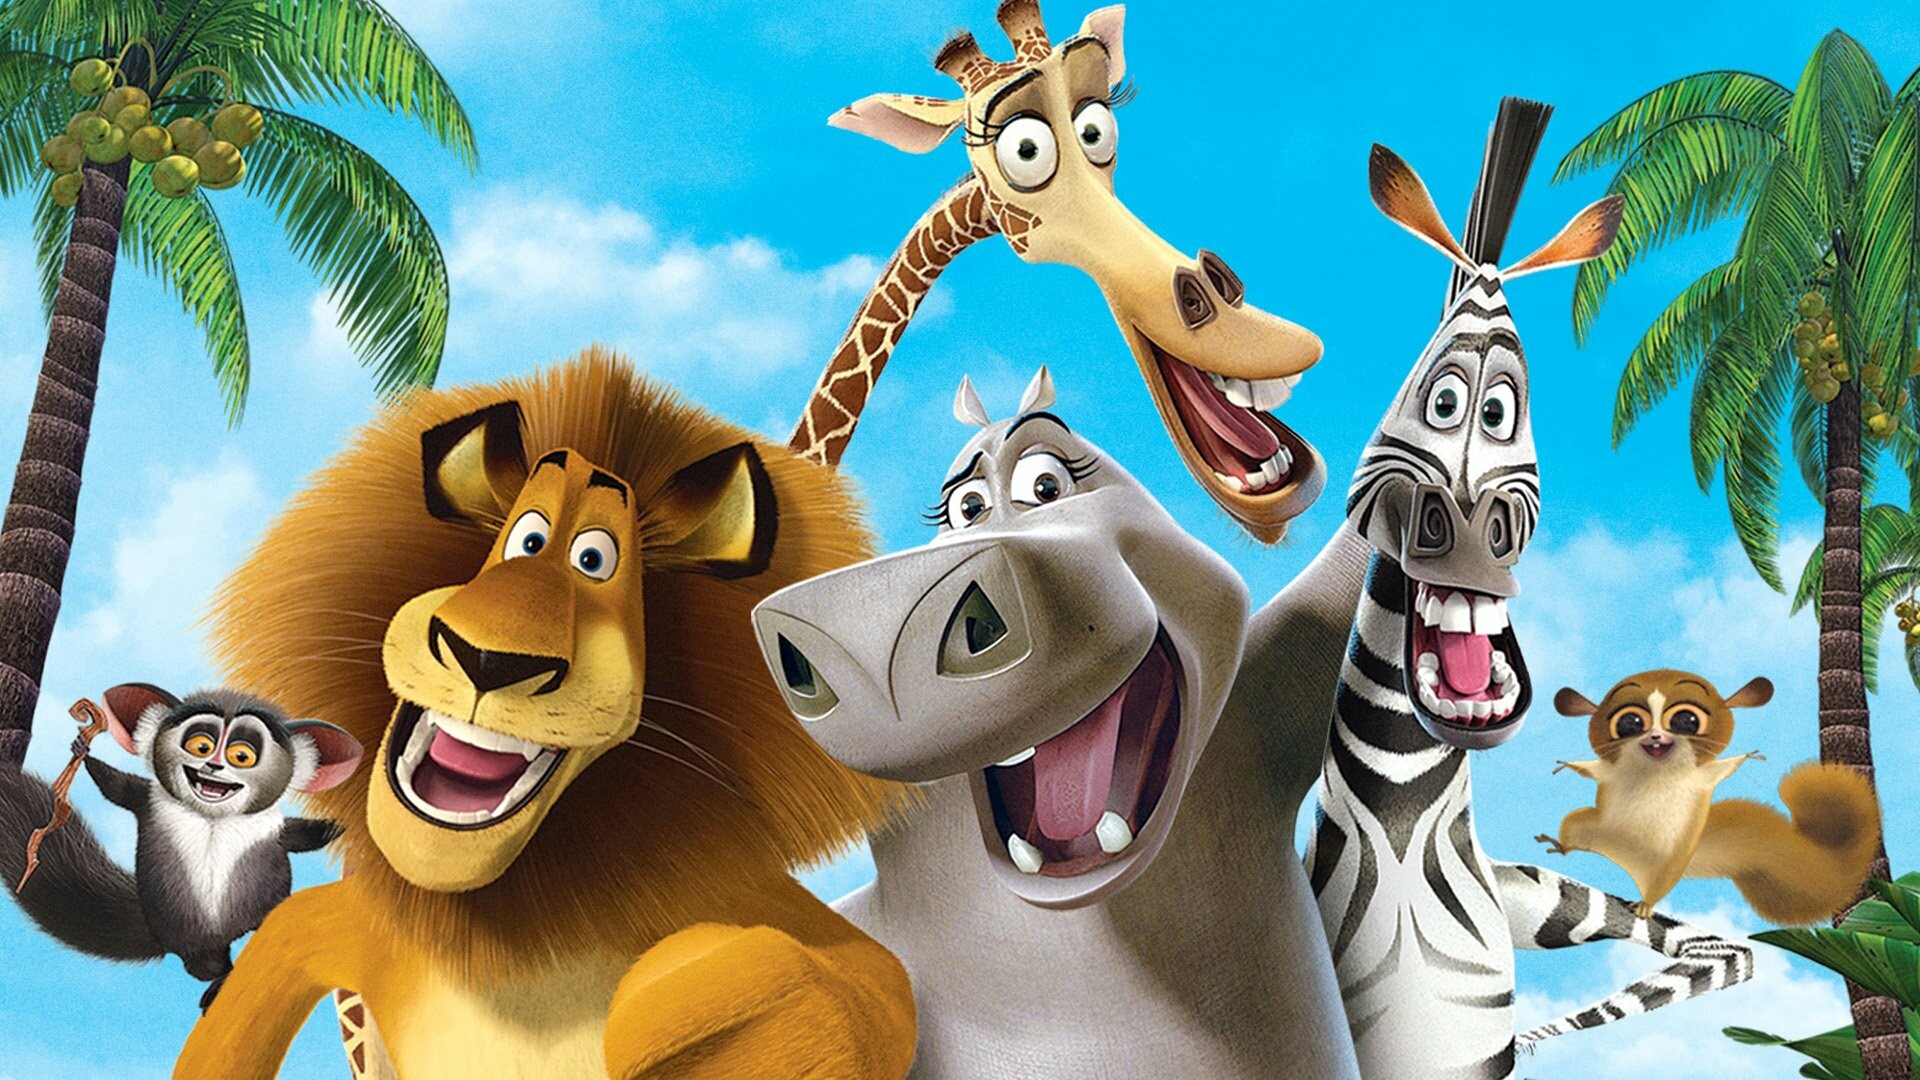 Madagascar (Movie): Four animal friends get a taste of the wild life when they break out of captivity at the Central Park Zoo. 1920x1080 Full HD Wallpaper.